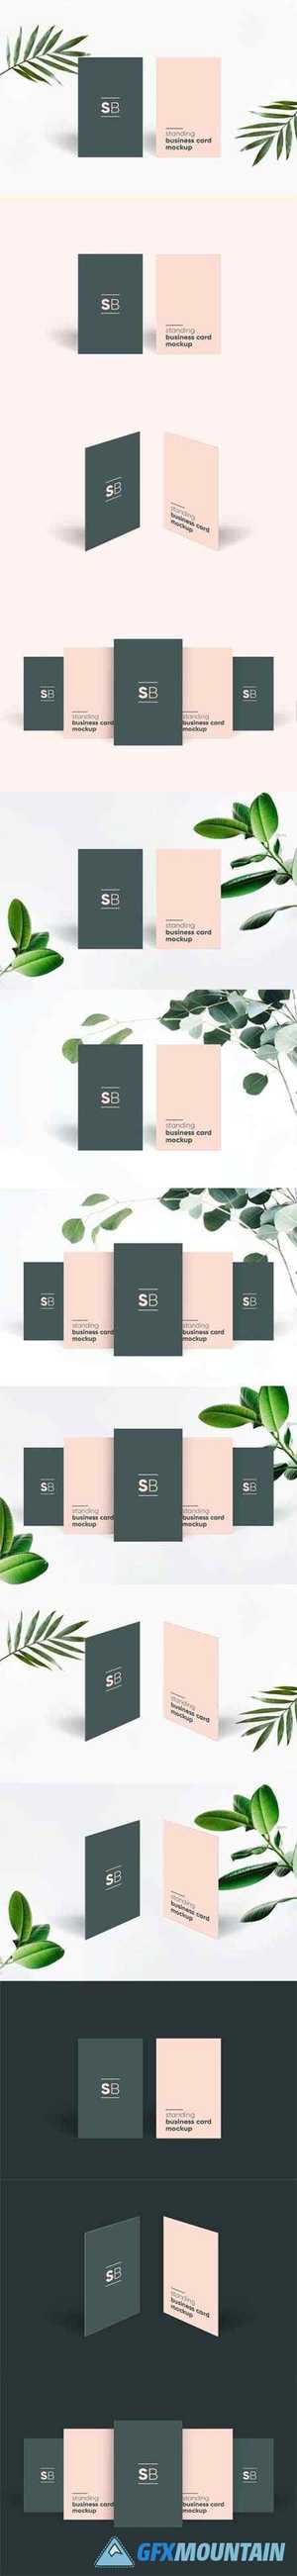 Standing Business Card Mockup 4126731 